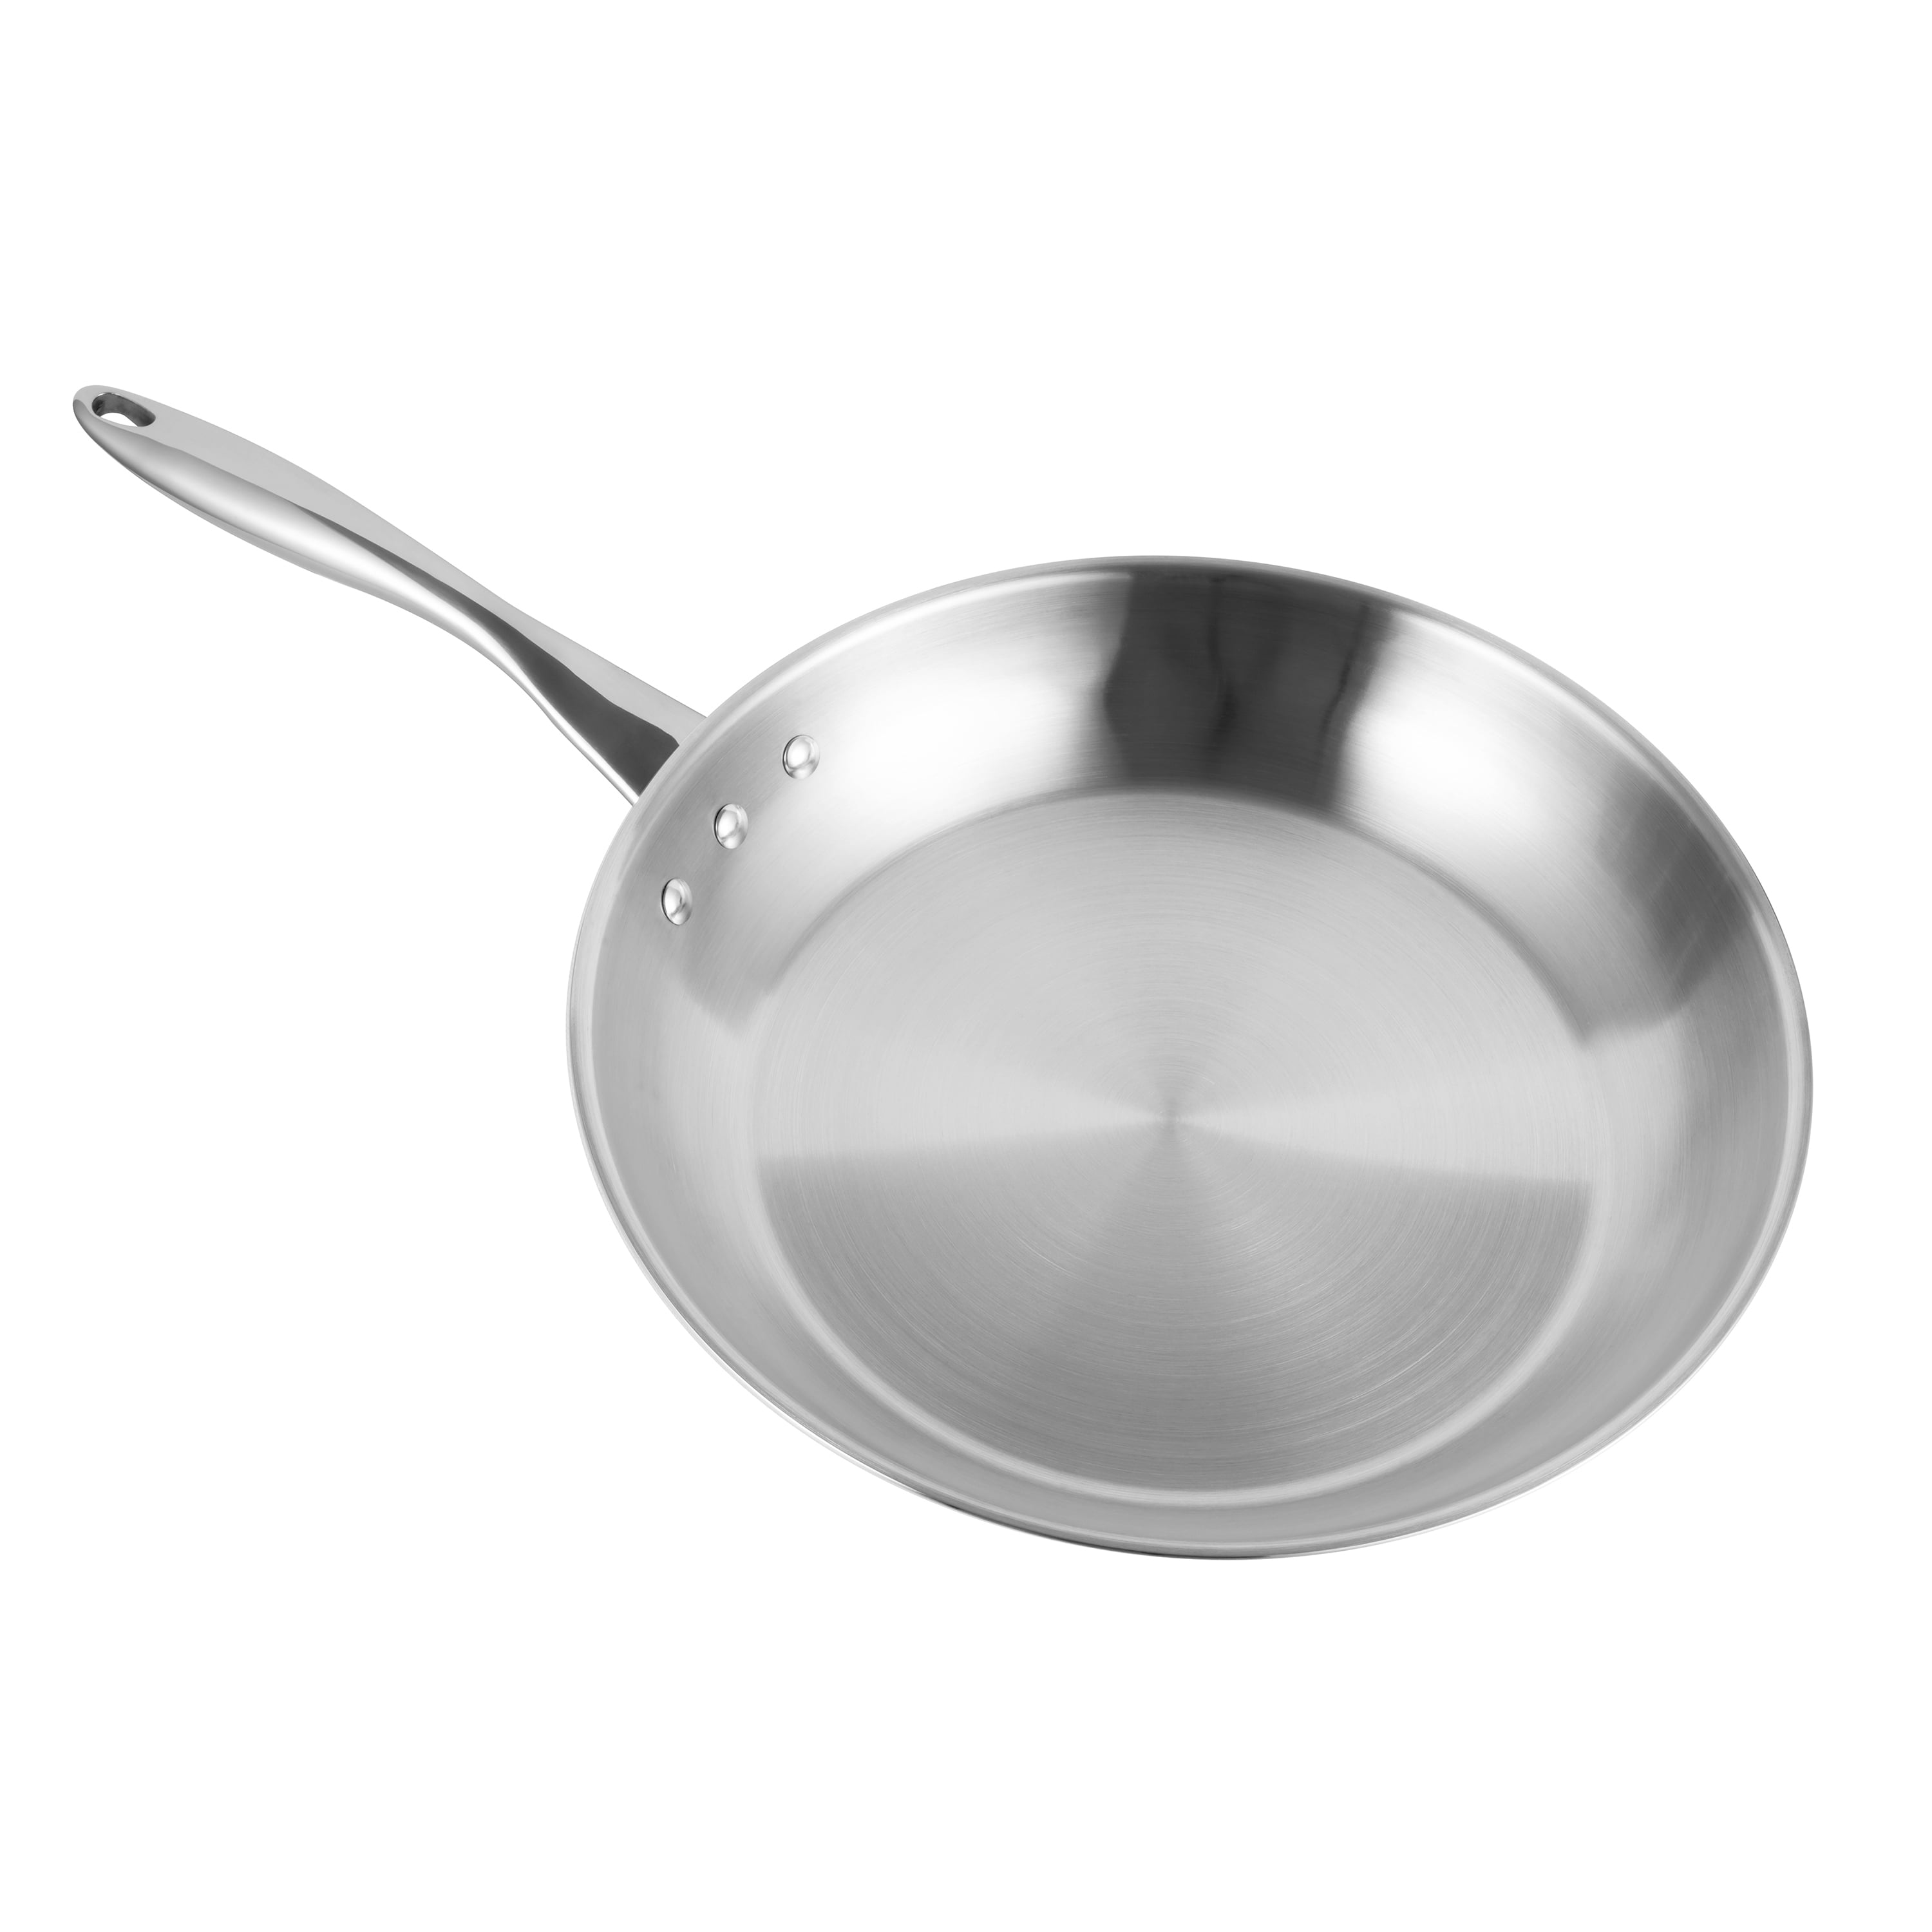  12 Stainless Steel Pan by Ozeri with ETERNA, a 100% PFOA and  APEO-Free Non-Stick Coating